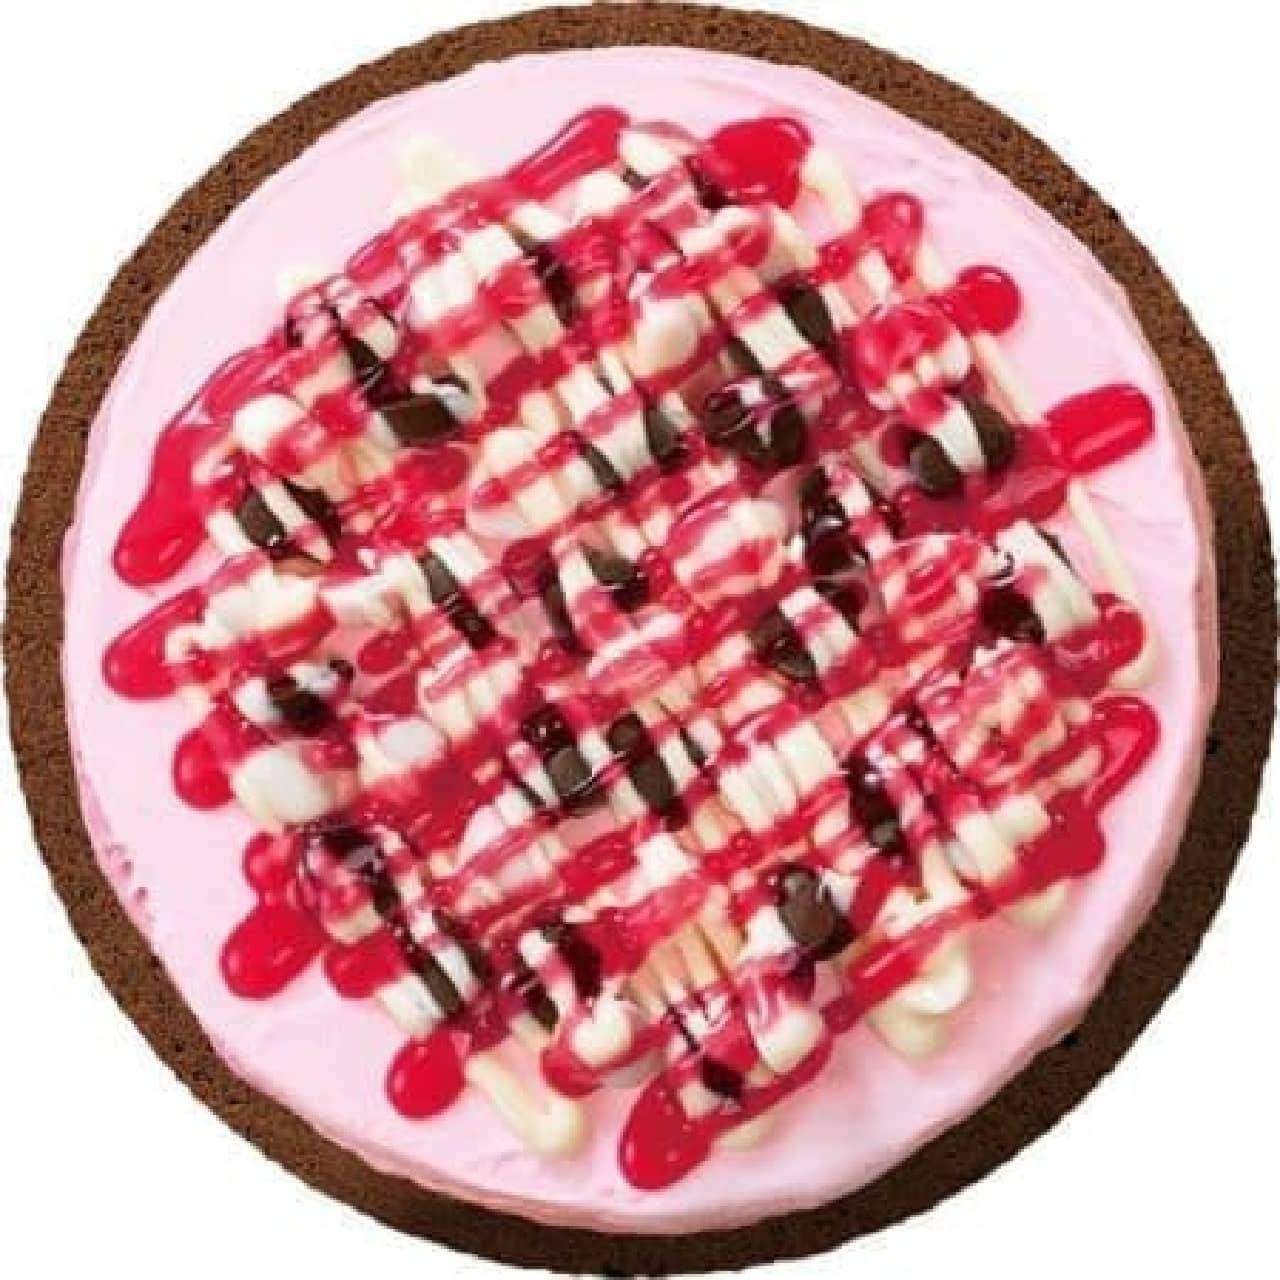 "Raspberry Special" is an ice pizza with brownie dough, raspberry ice cream and pink whipped cream.